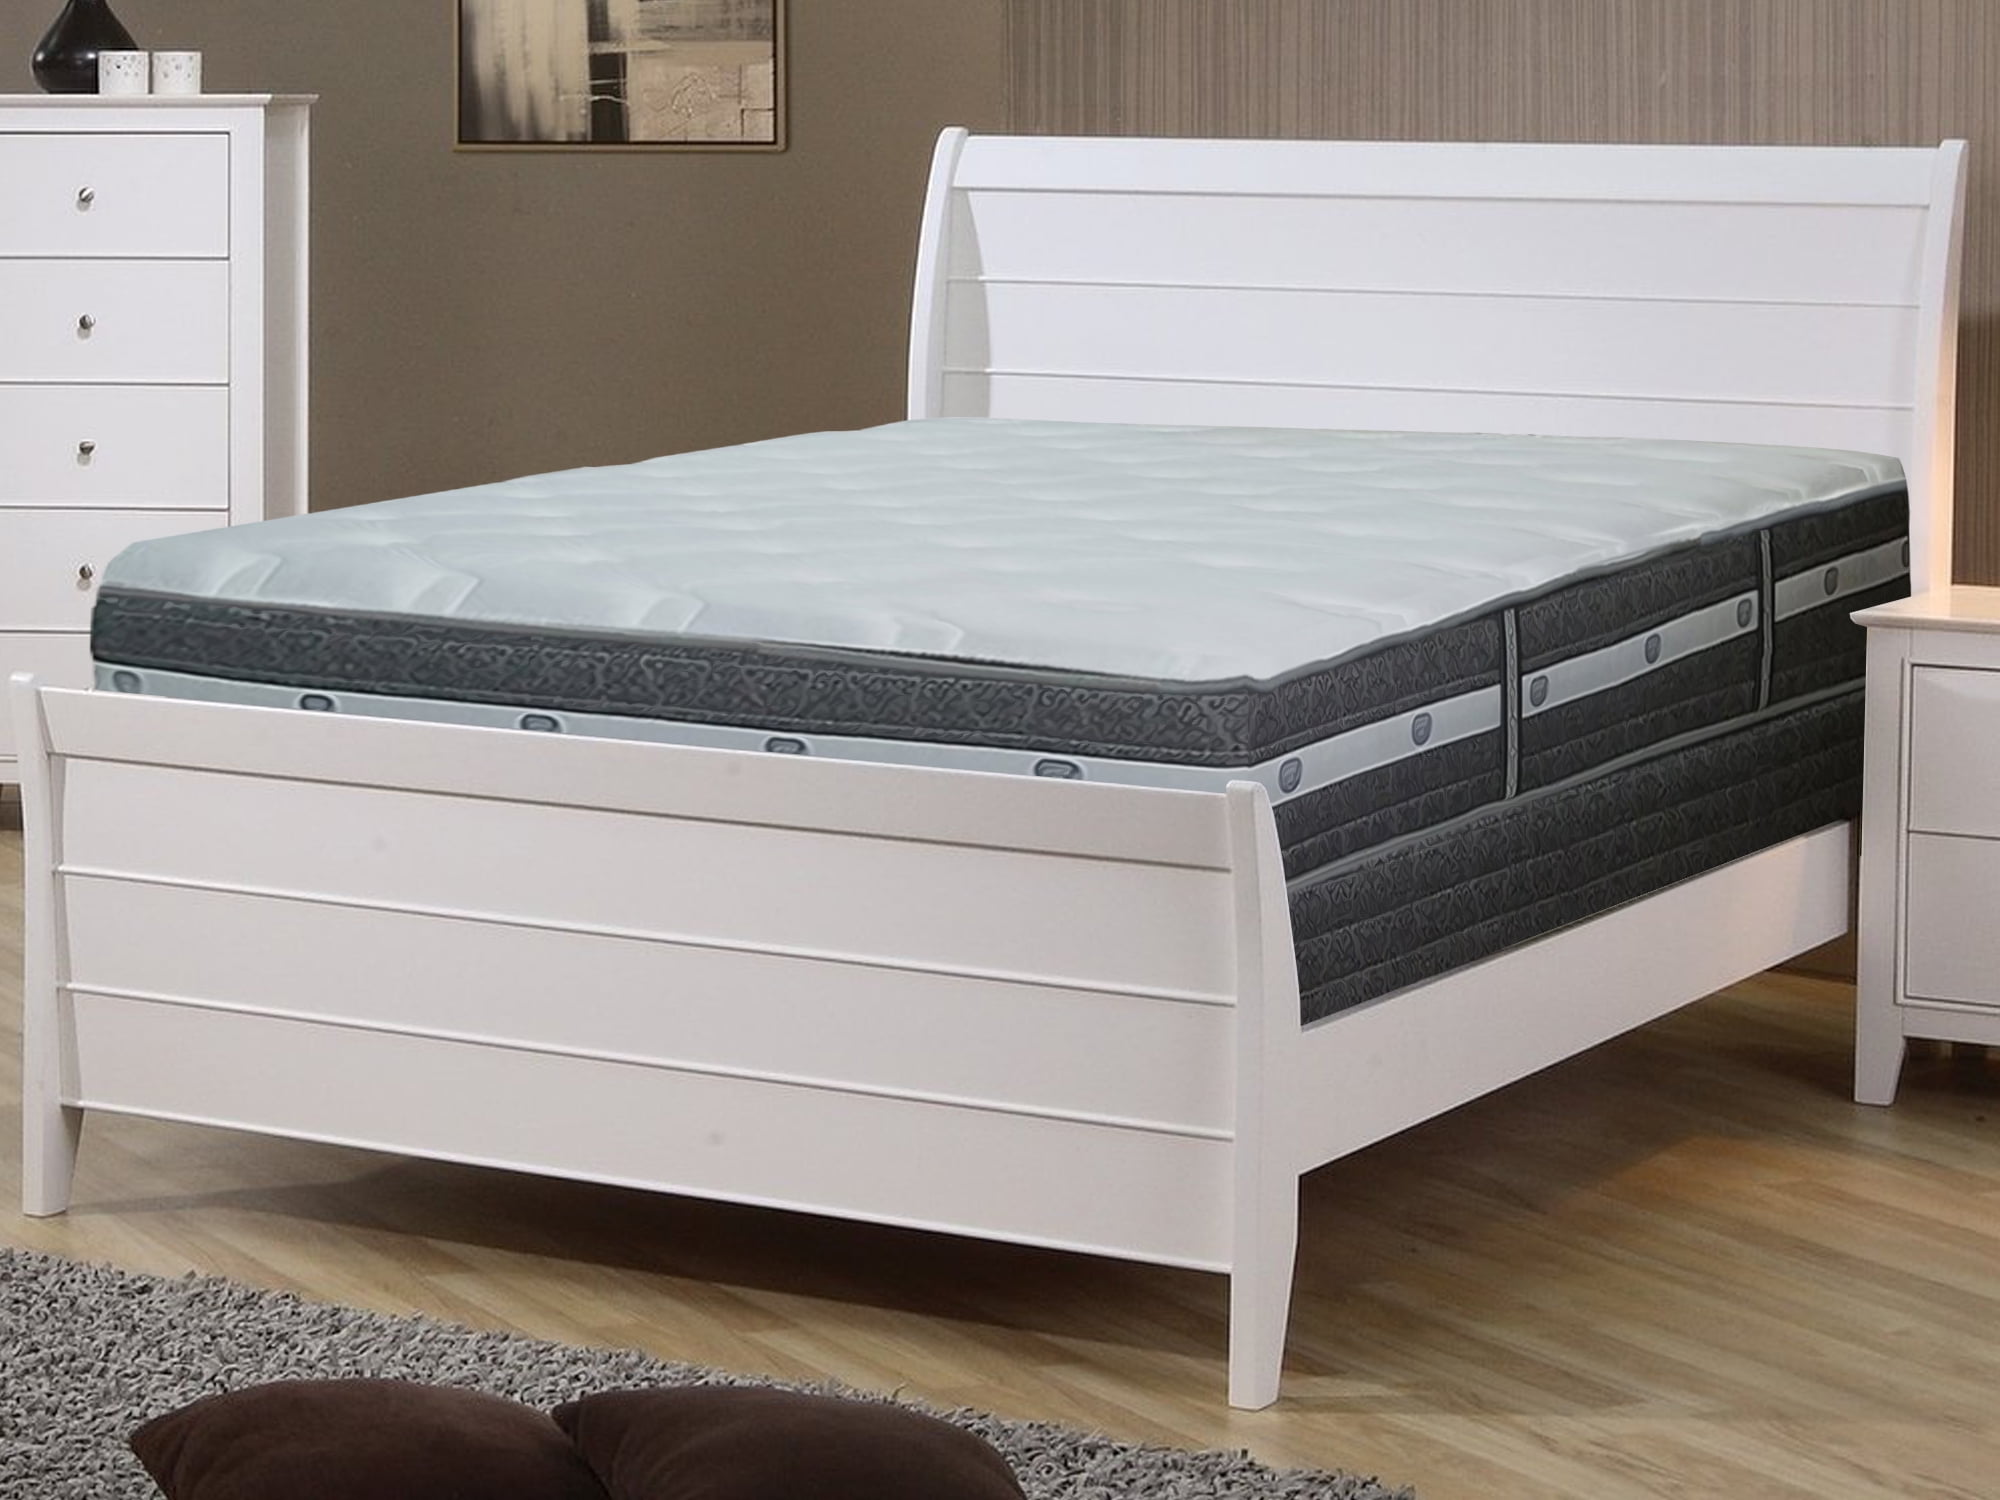 queen size mattress and box springs set